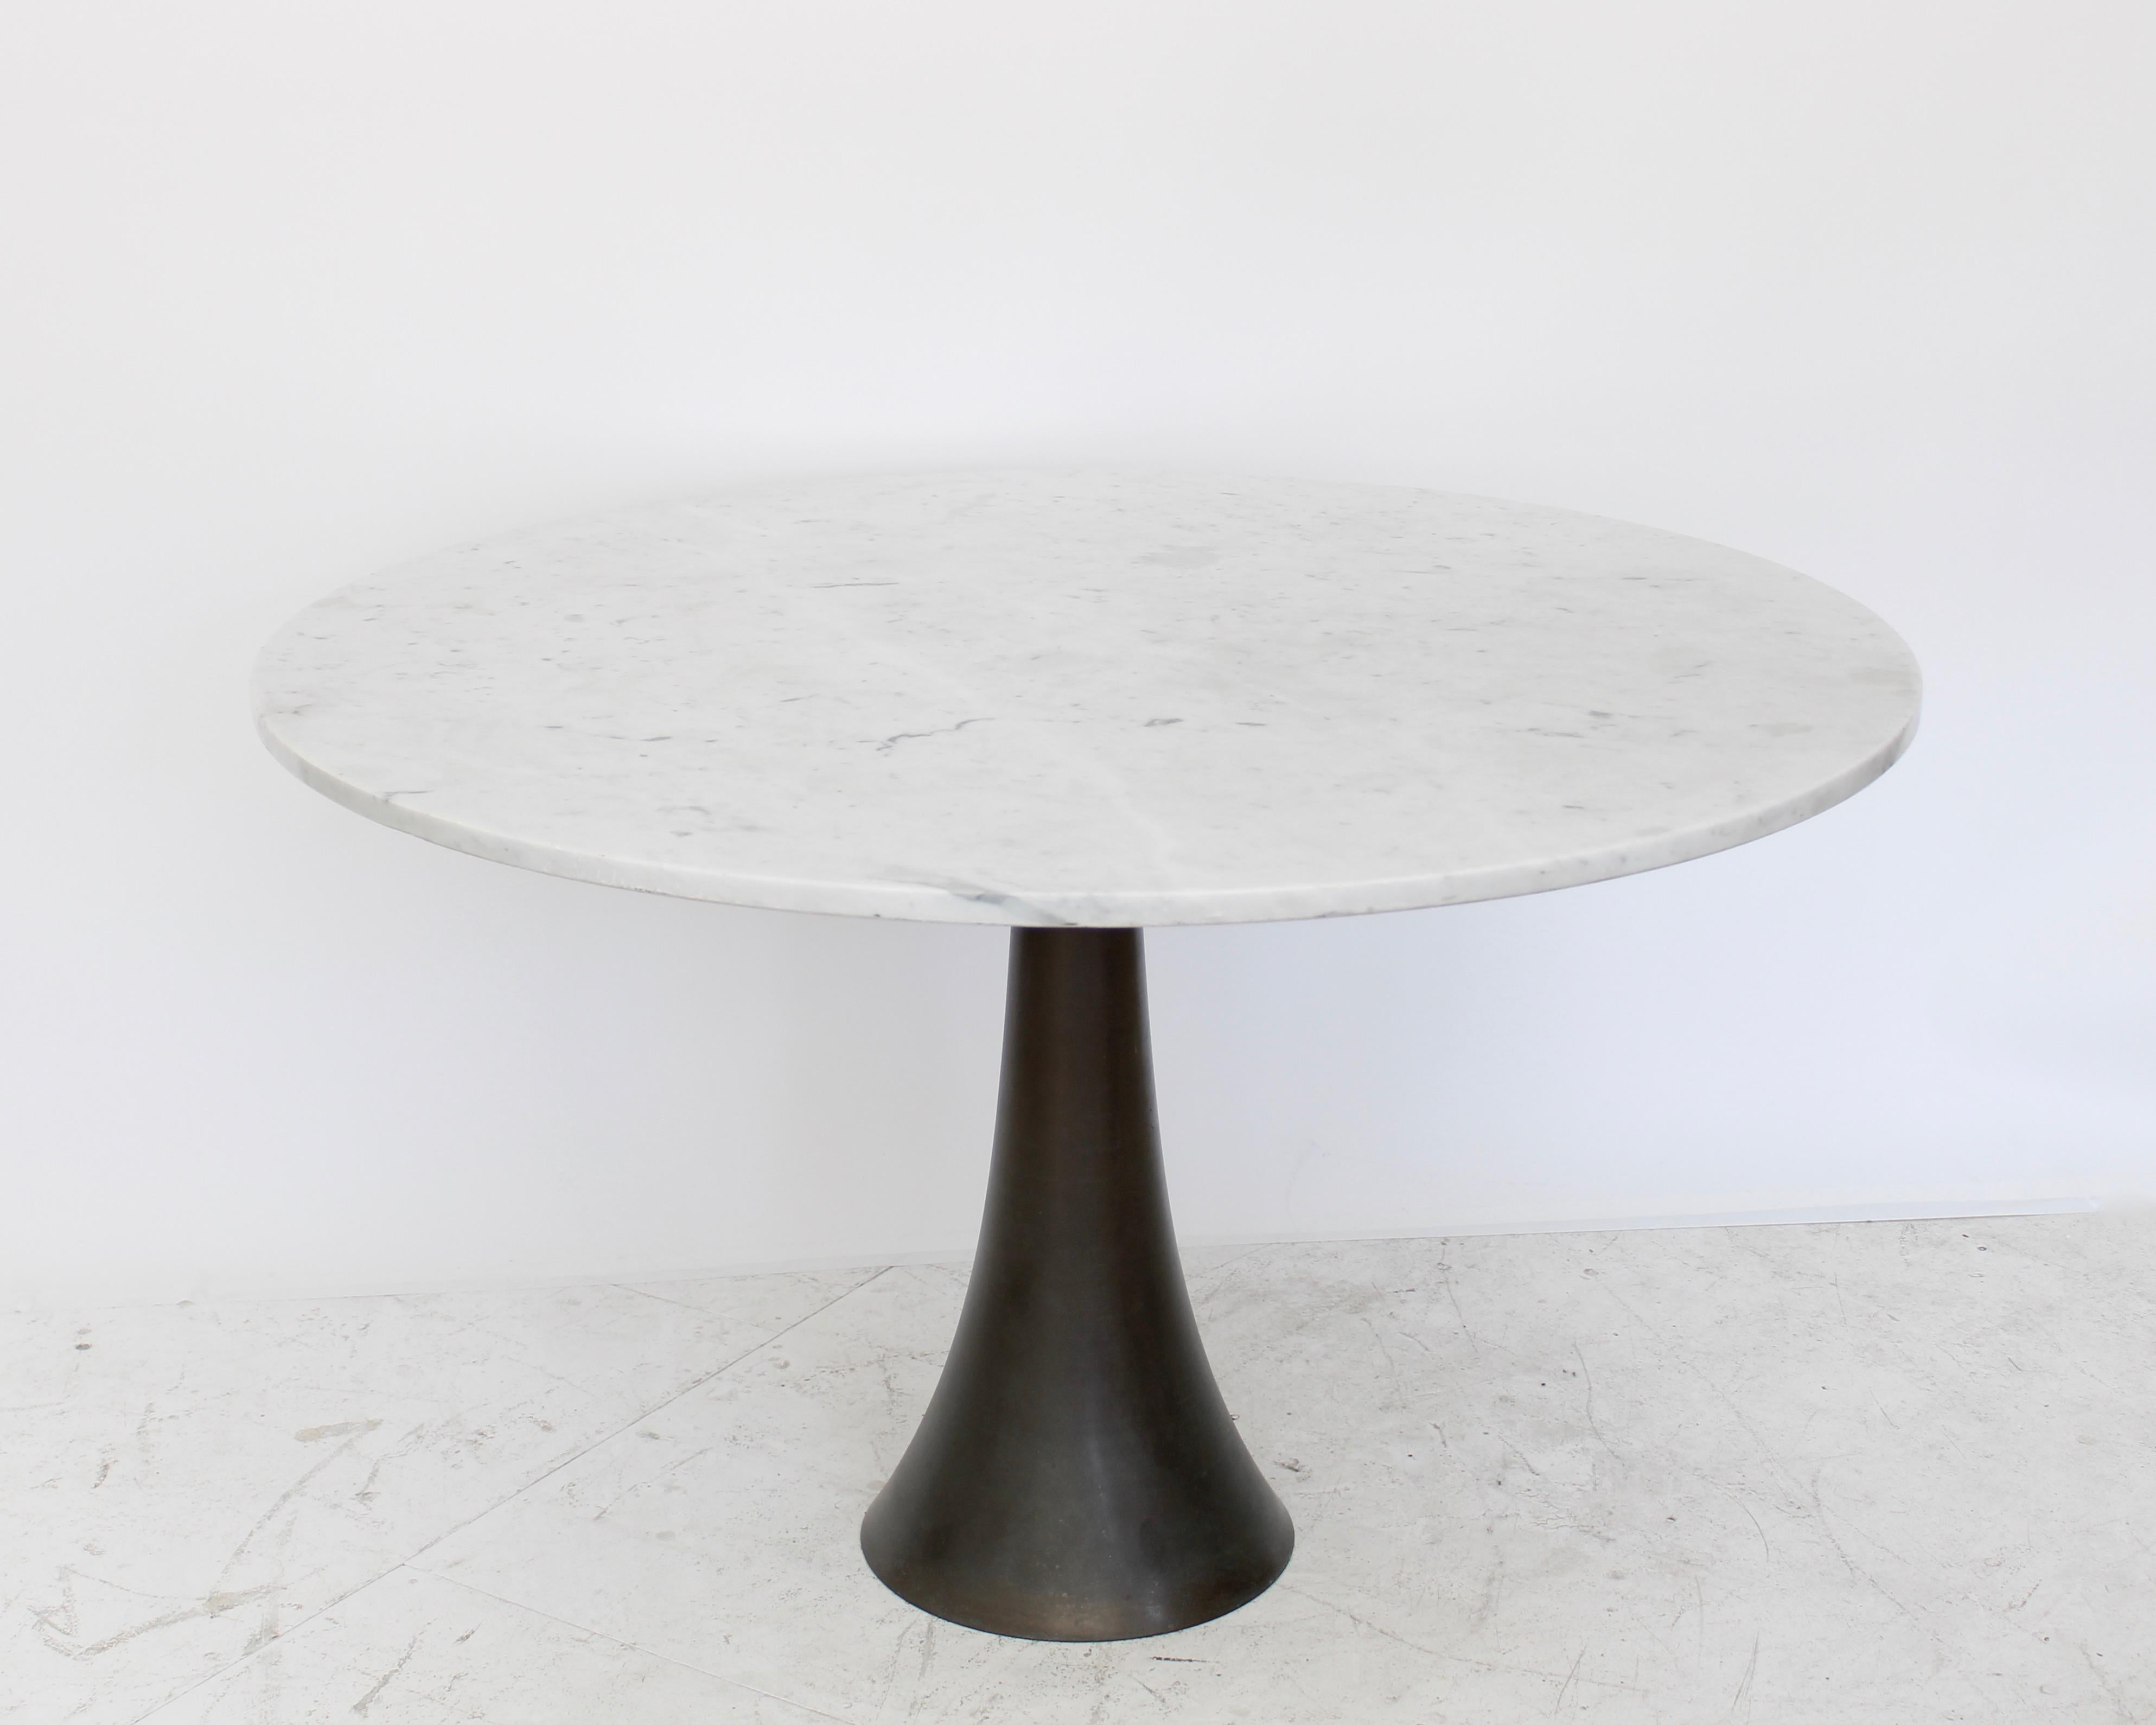 Angelo Mangiarotti dining table, Model 302 Manufactured by Bernini.
Turned tulip shaped cast bronze base and Carrara marble top. 
Bronze base by Fonderia Battaglia. 
Made in Italy, circa 1959.An Italian 20th Century design Icon.
The bronze base